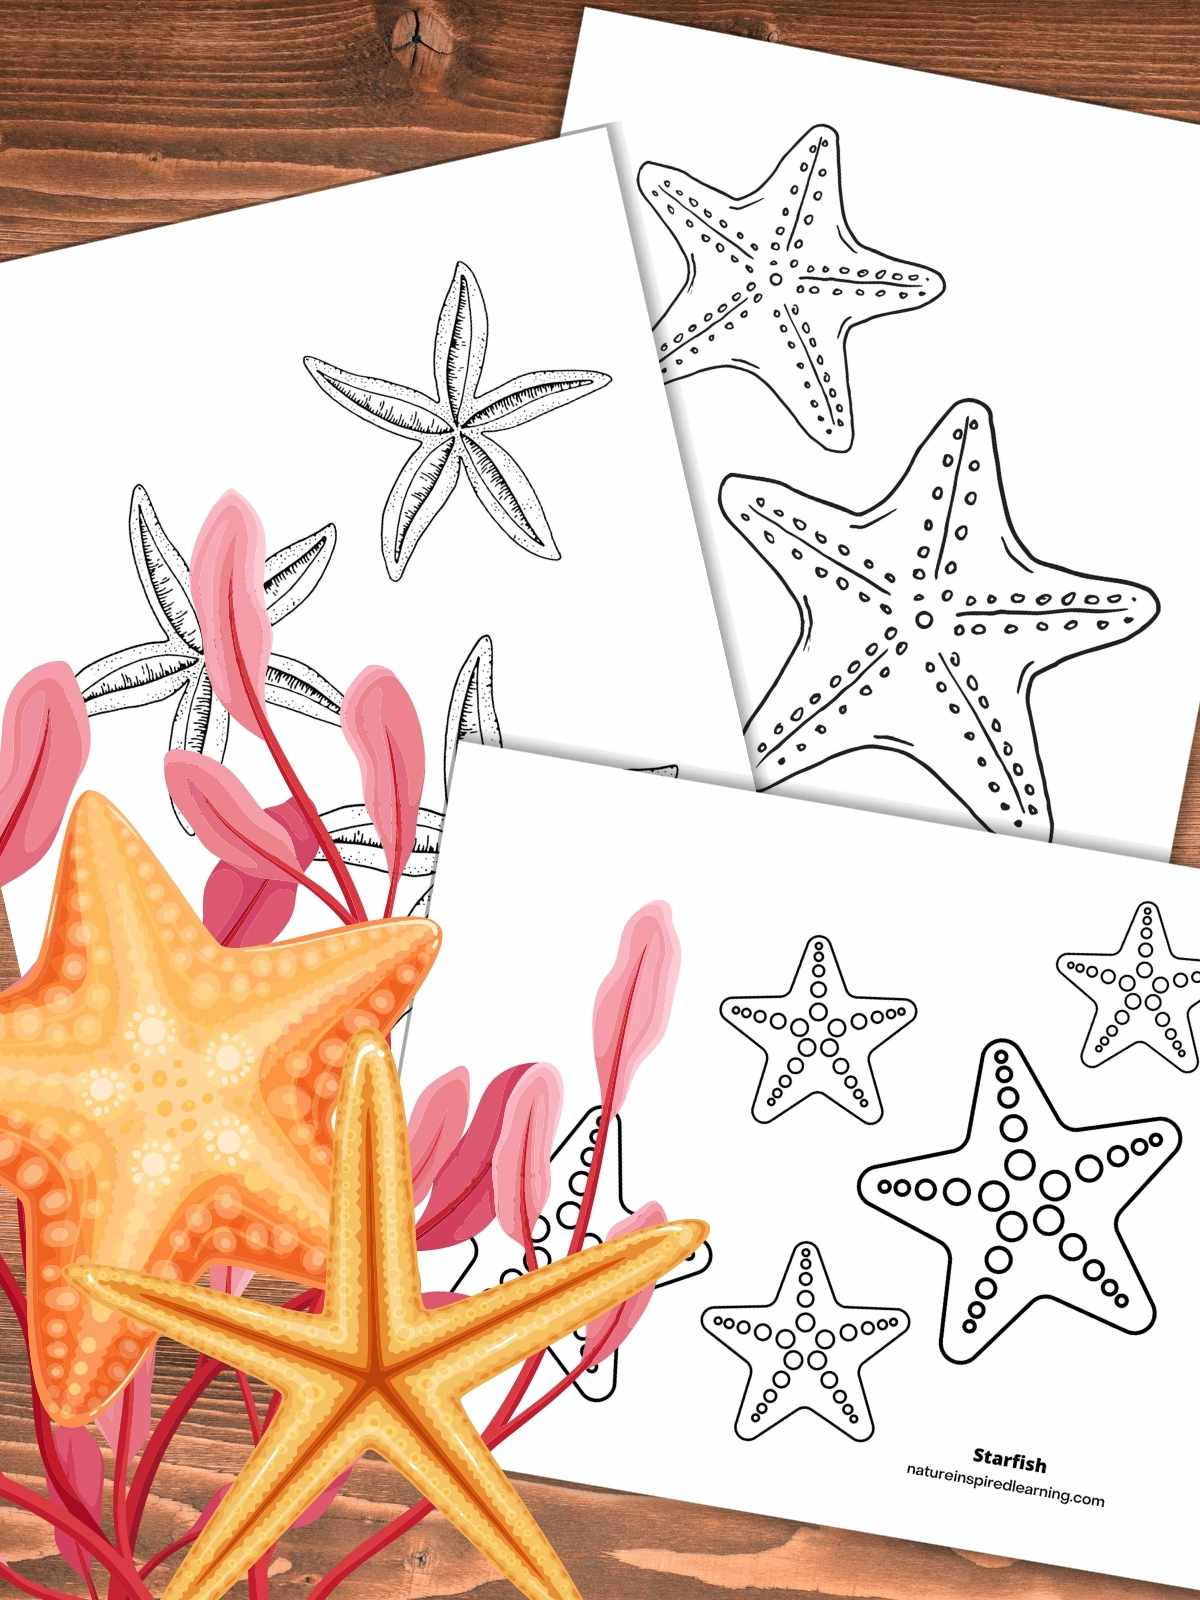 three printable starfish pictures to color overlapping on a wooden background with two yellow sea stars with red seaweed bottom left